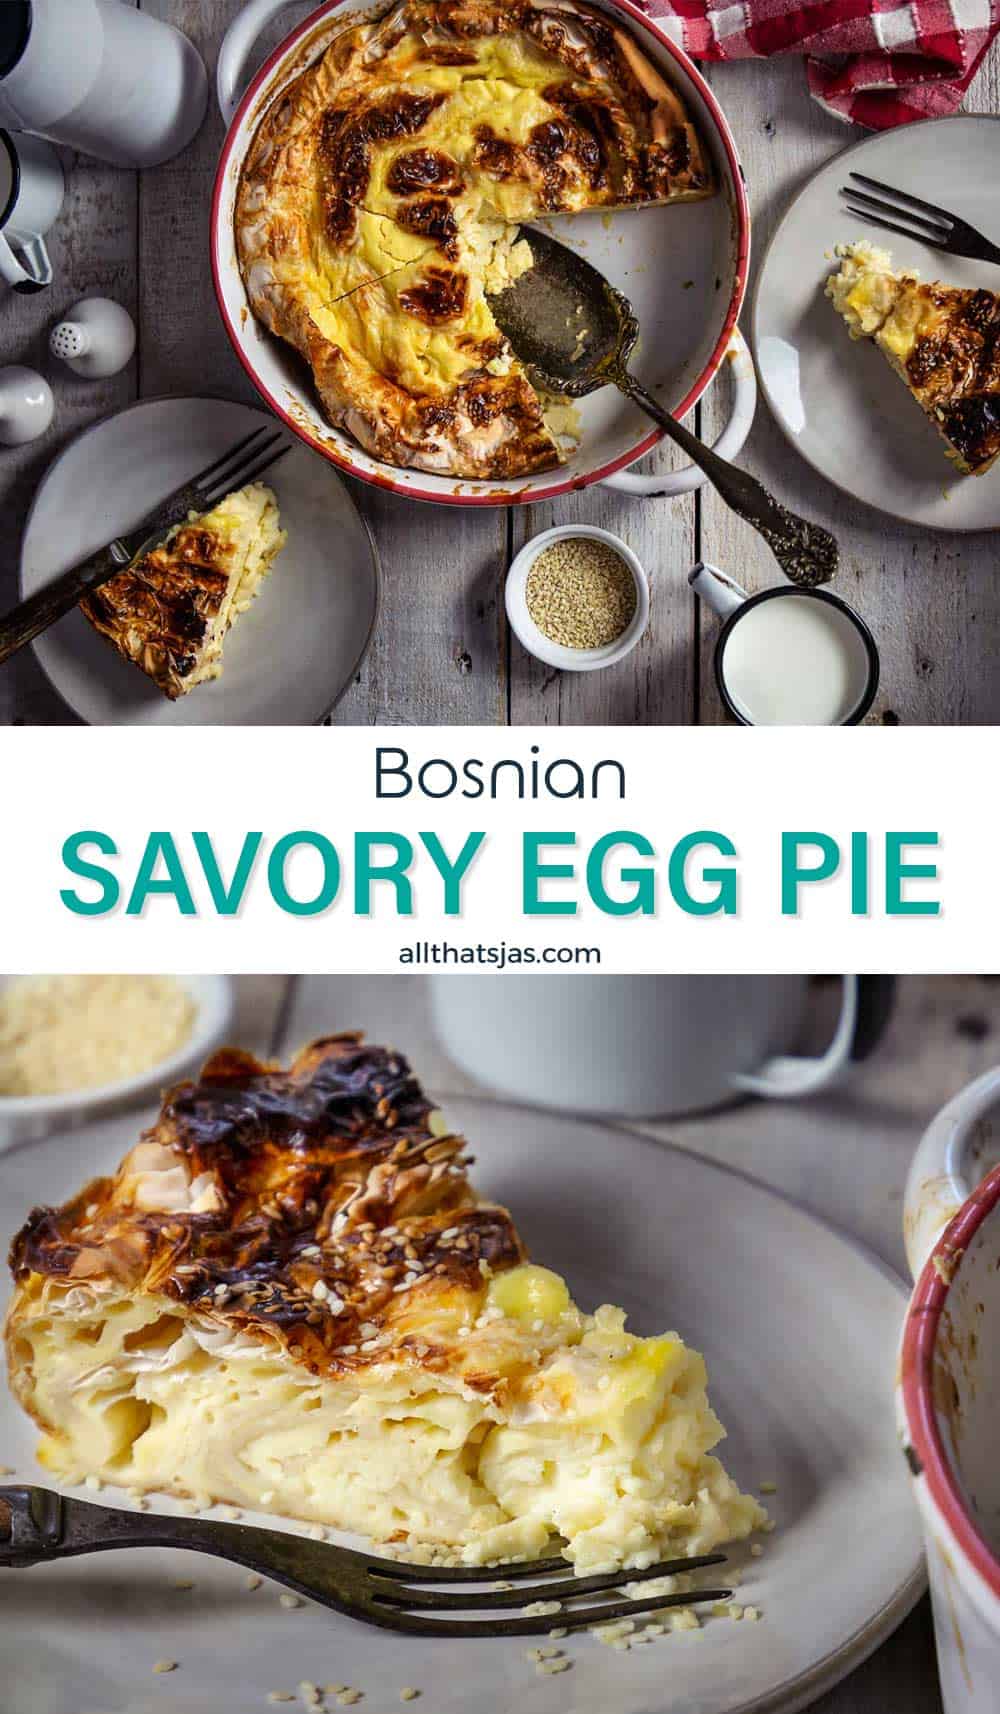 Two photo image of the savory egg pie with text overlay in the middle.